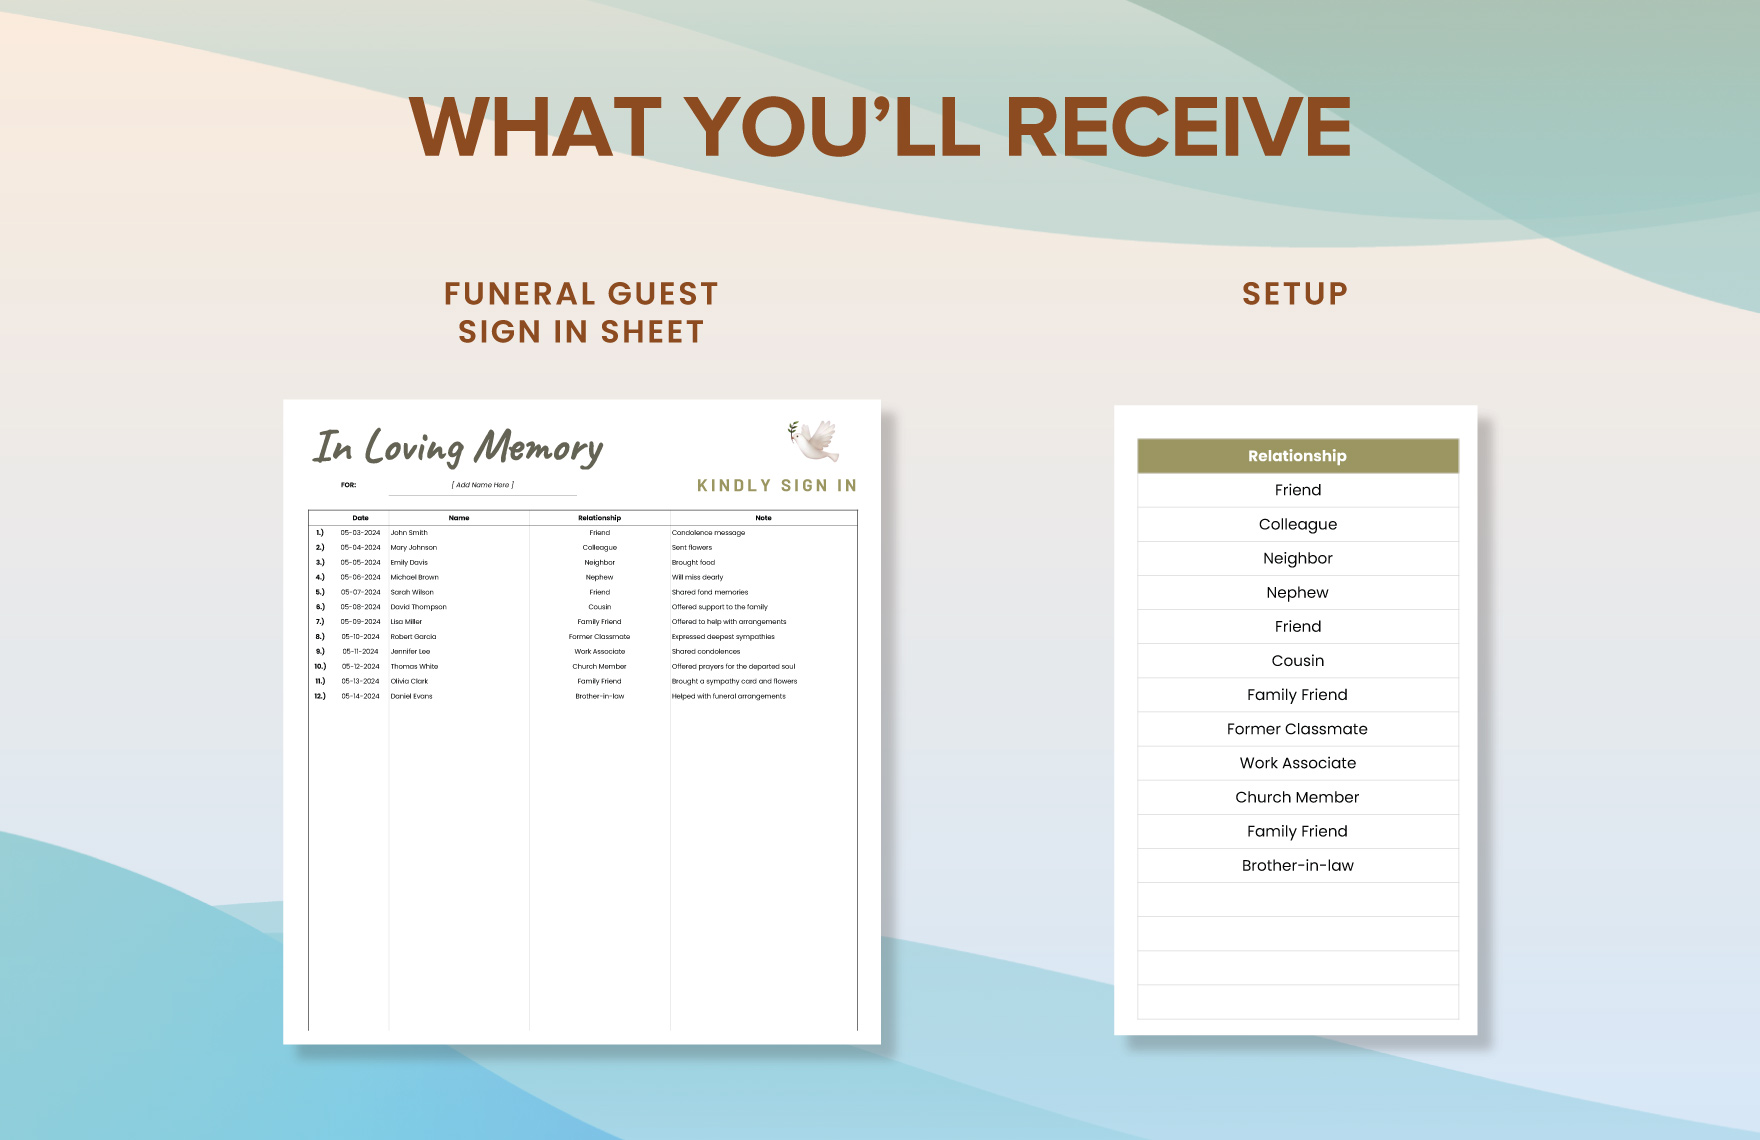 Funeral Guest Sign in Sheet Template